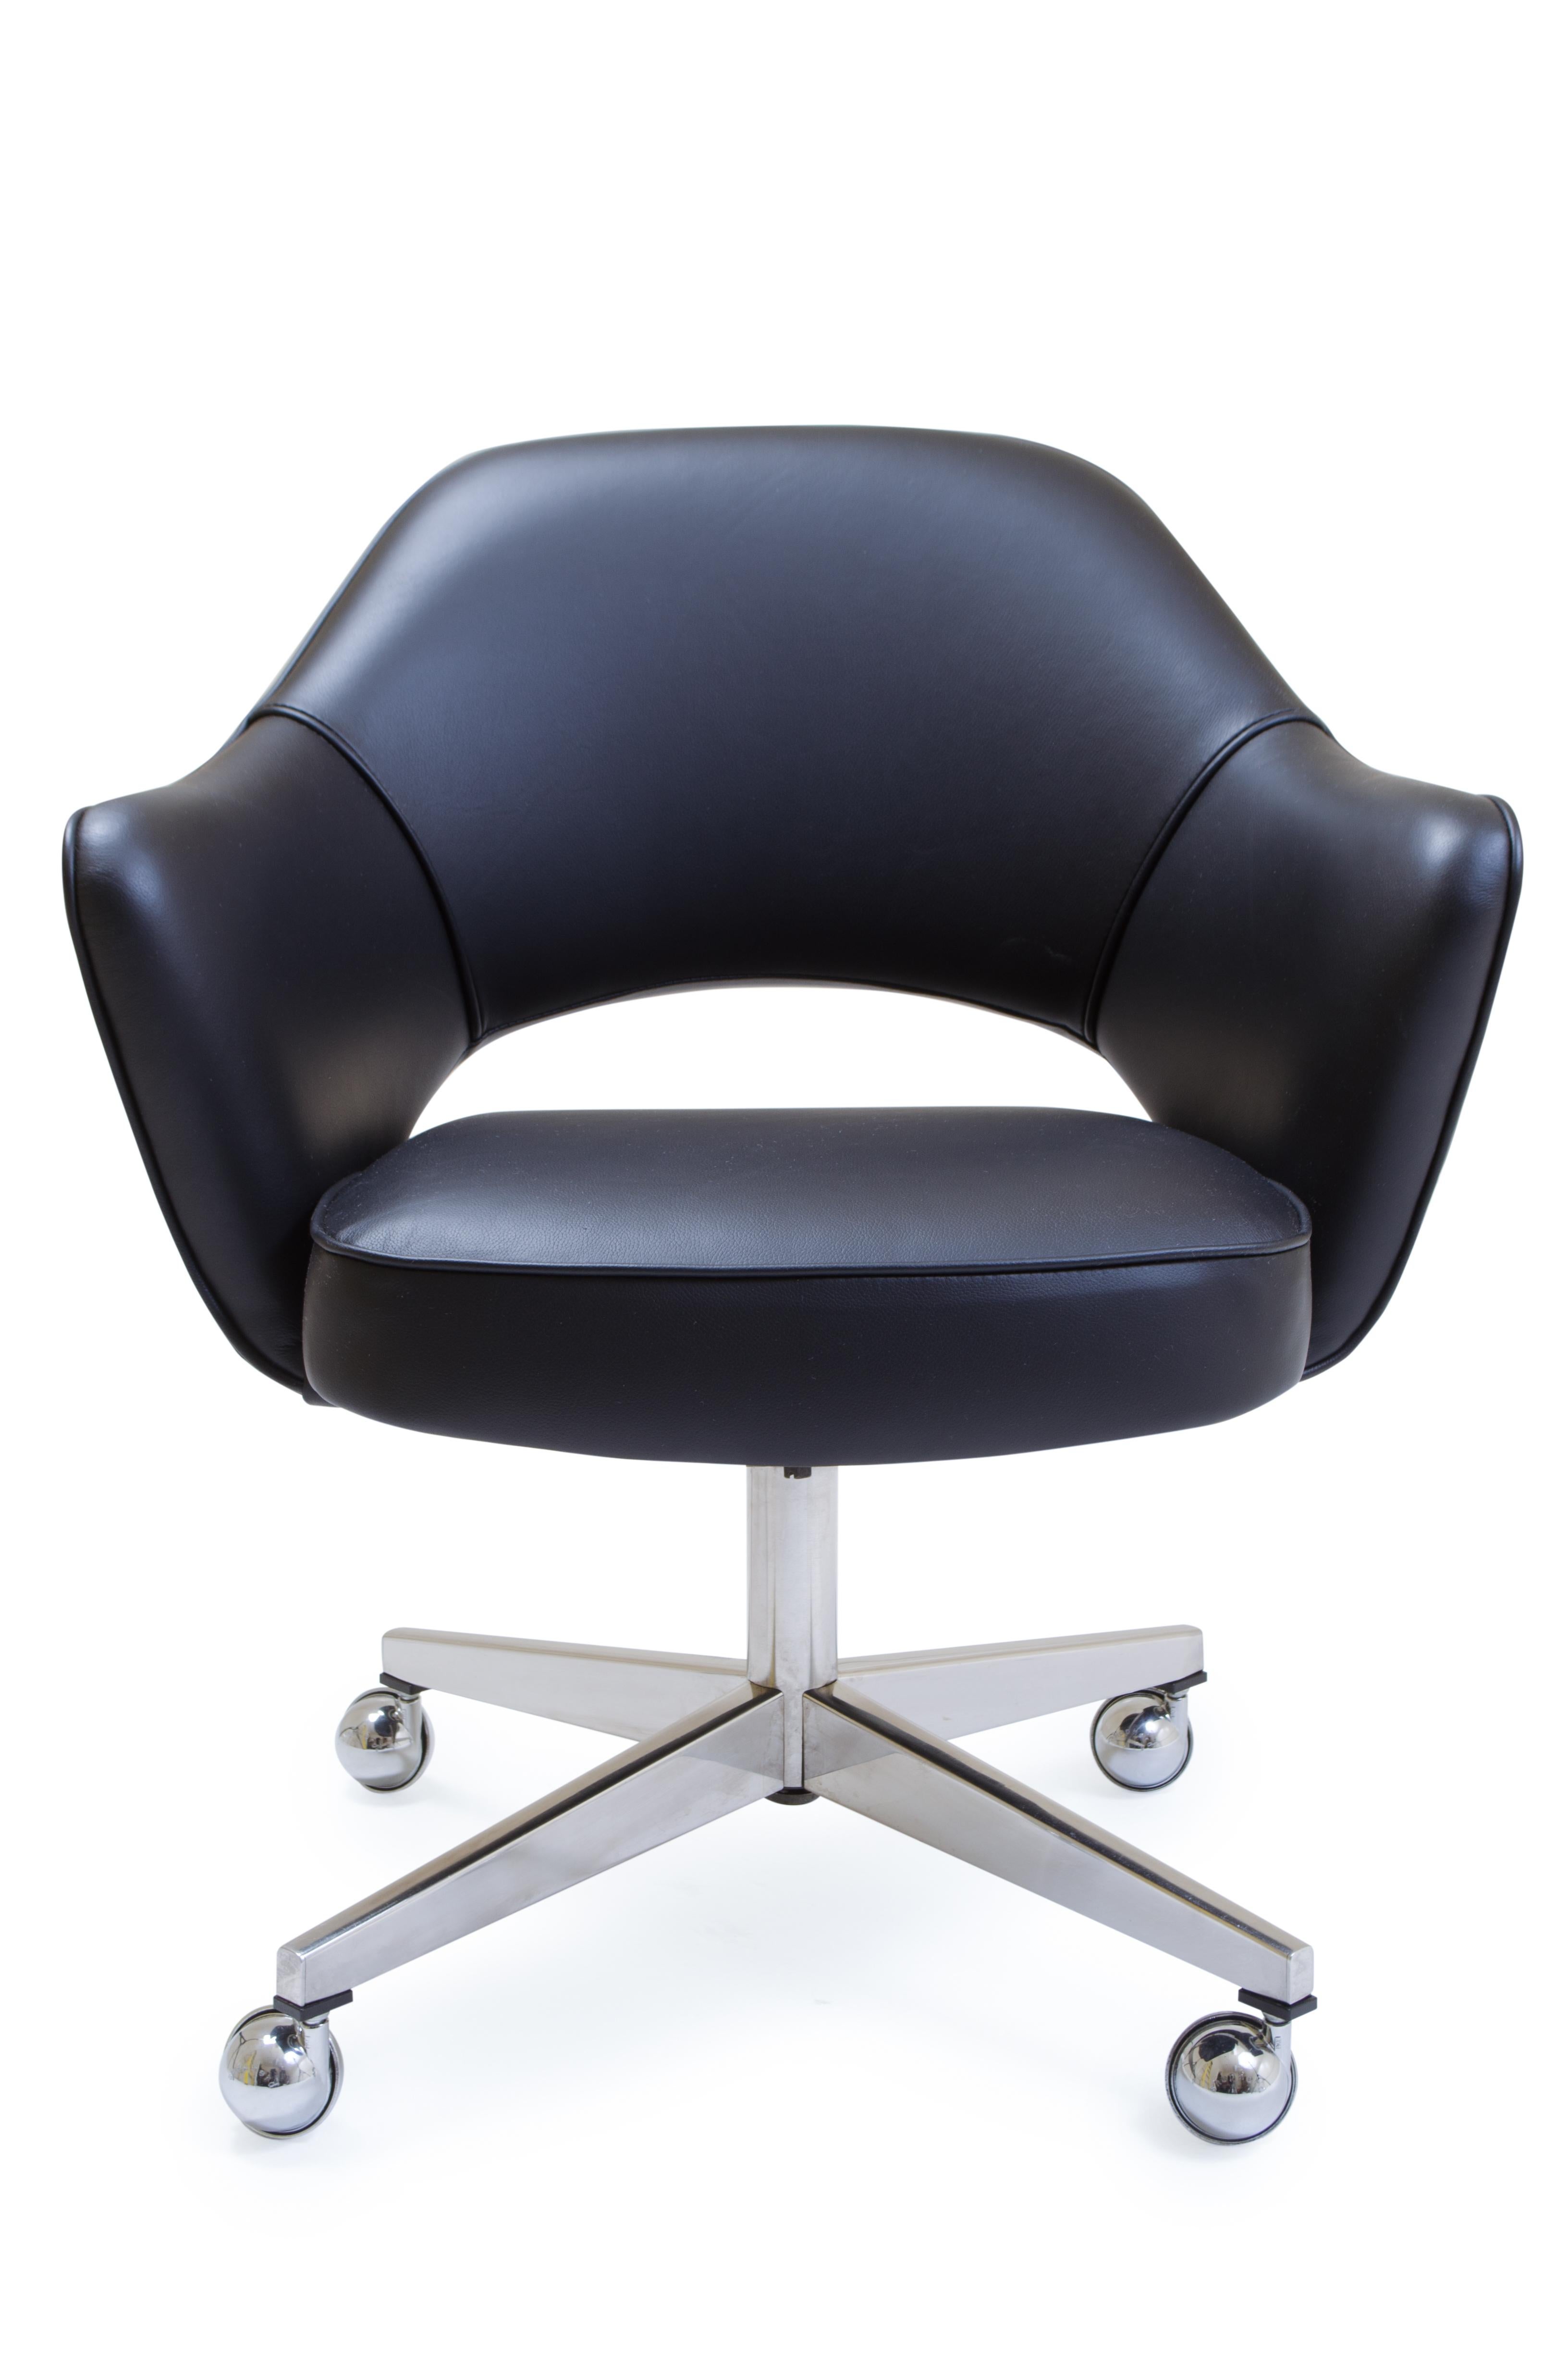 This gorgeous vintage Knoll Saarinen Executive Armchair comes in its original supple black leather in very good condition. There is very minor wear. This particular chair has been installed, with a vintage swivel base, restored, polished, and with